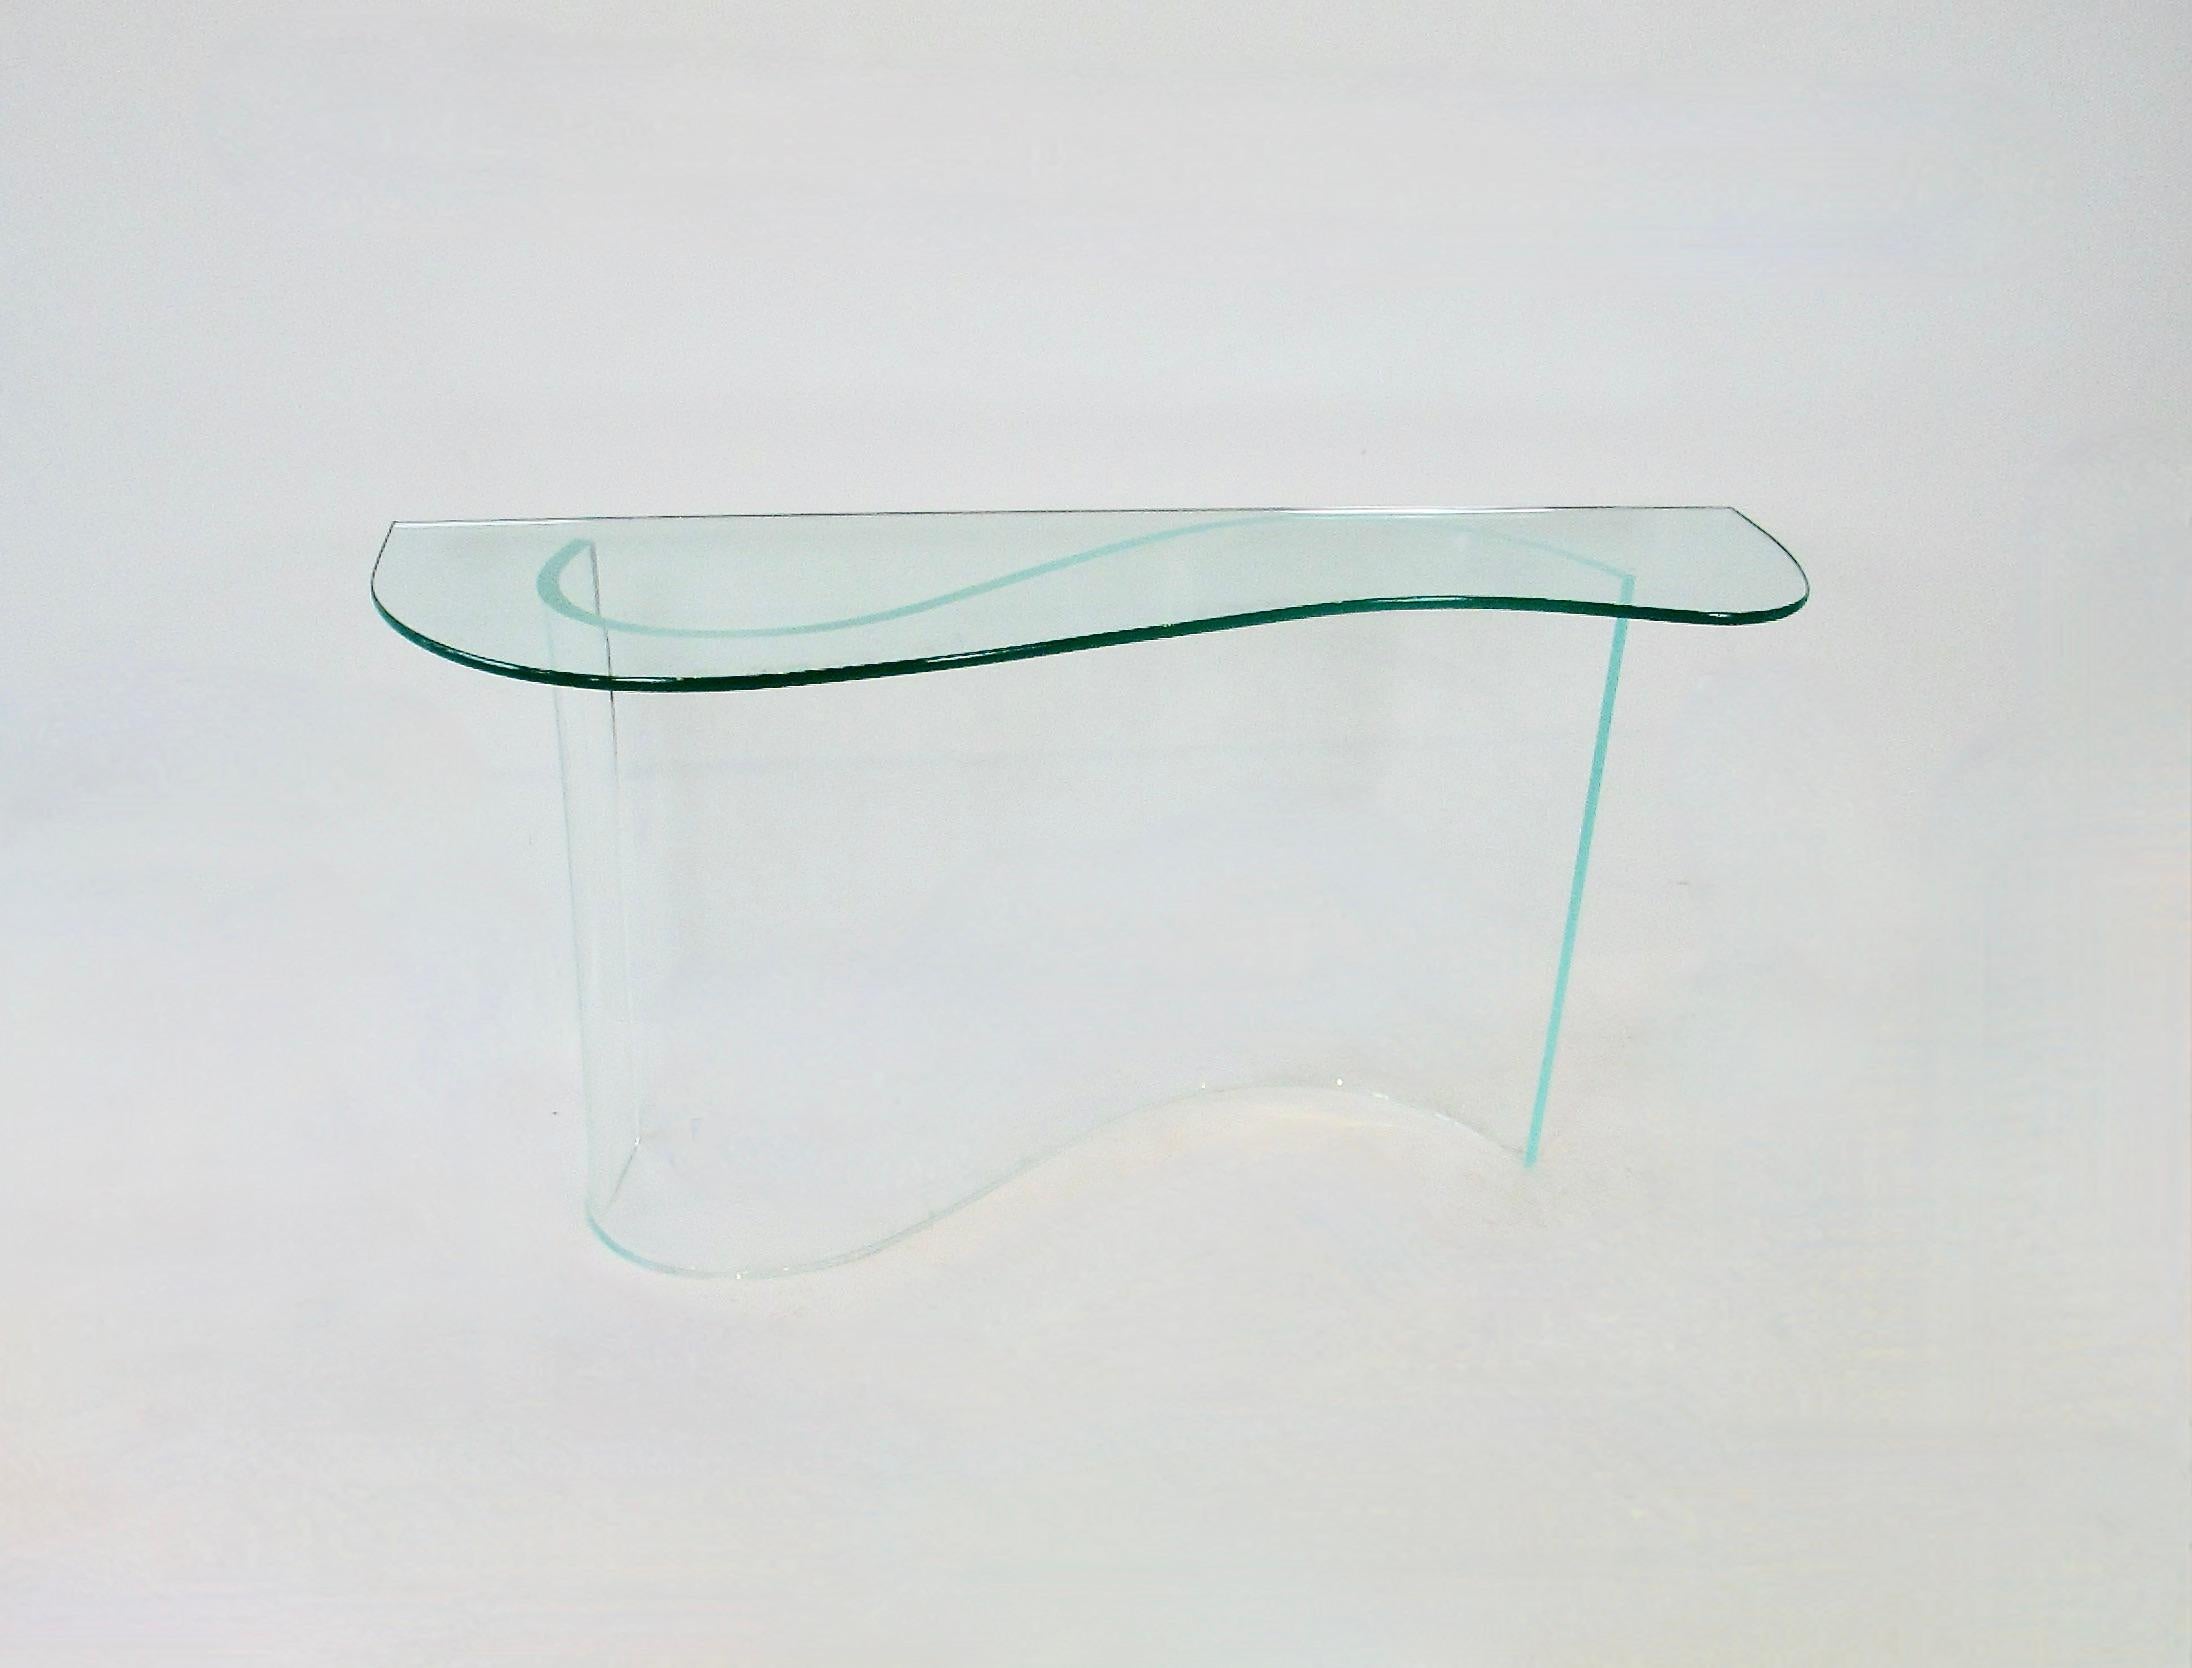 Wonderful in its simplicity entry way console table . Bio-morphic glass top floats on undulating wave lucite base . Very nice condition throughout . Glass measures 52 wide 16 deep on one end curves down to 12 deep on the opposite end . Base is .75